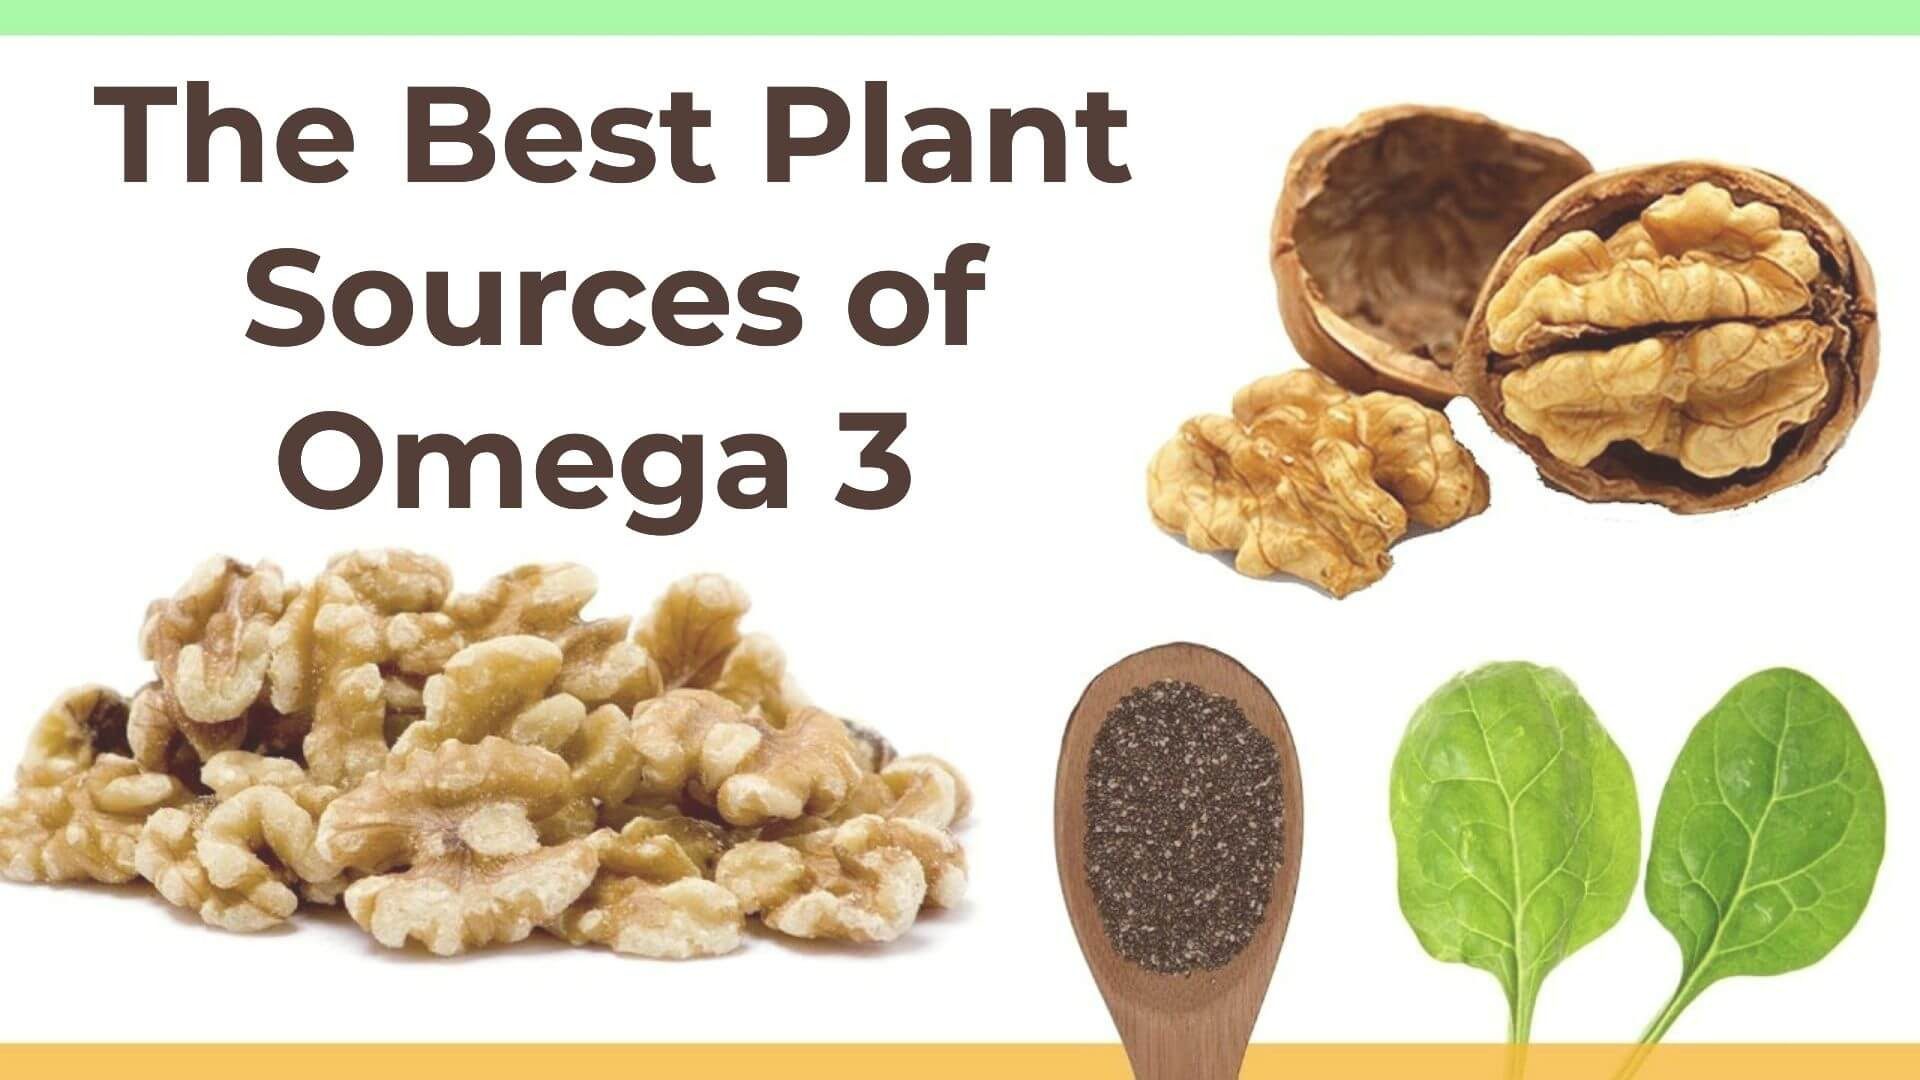 The Best Plant Sources of Omega 3